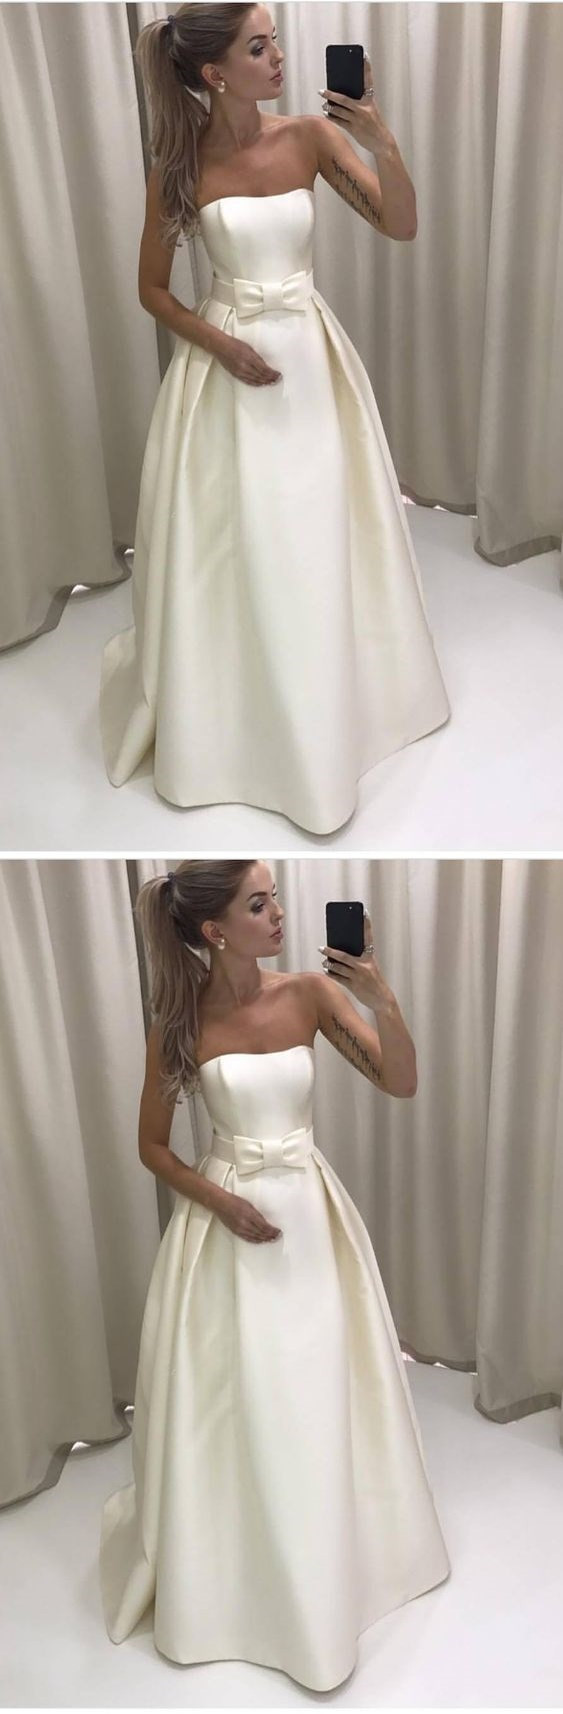 Custom Made White Satin Strapless Long Evening Dress With Ribbon, Prom